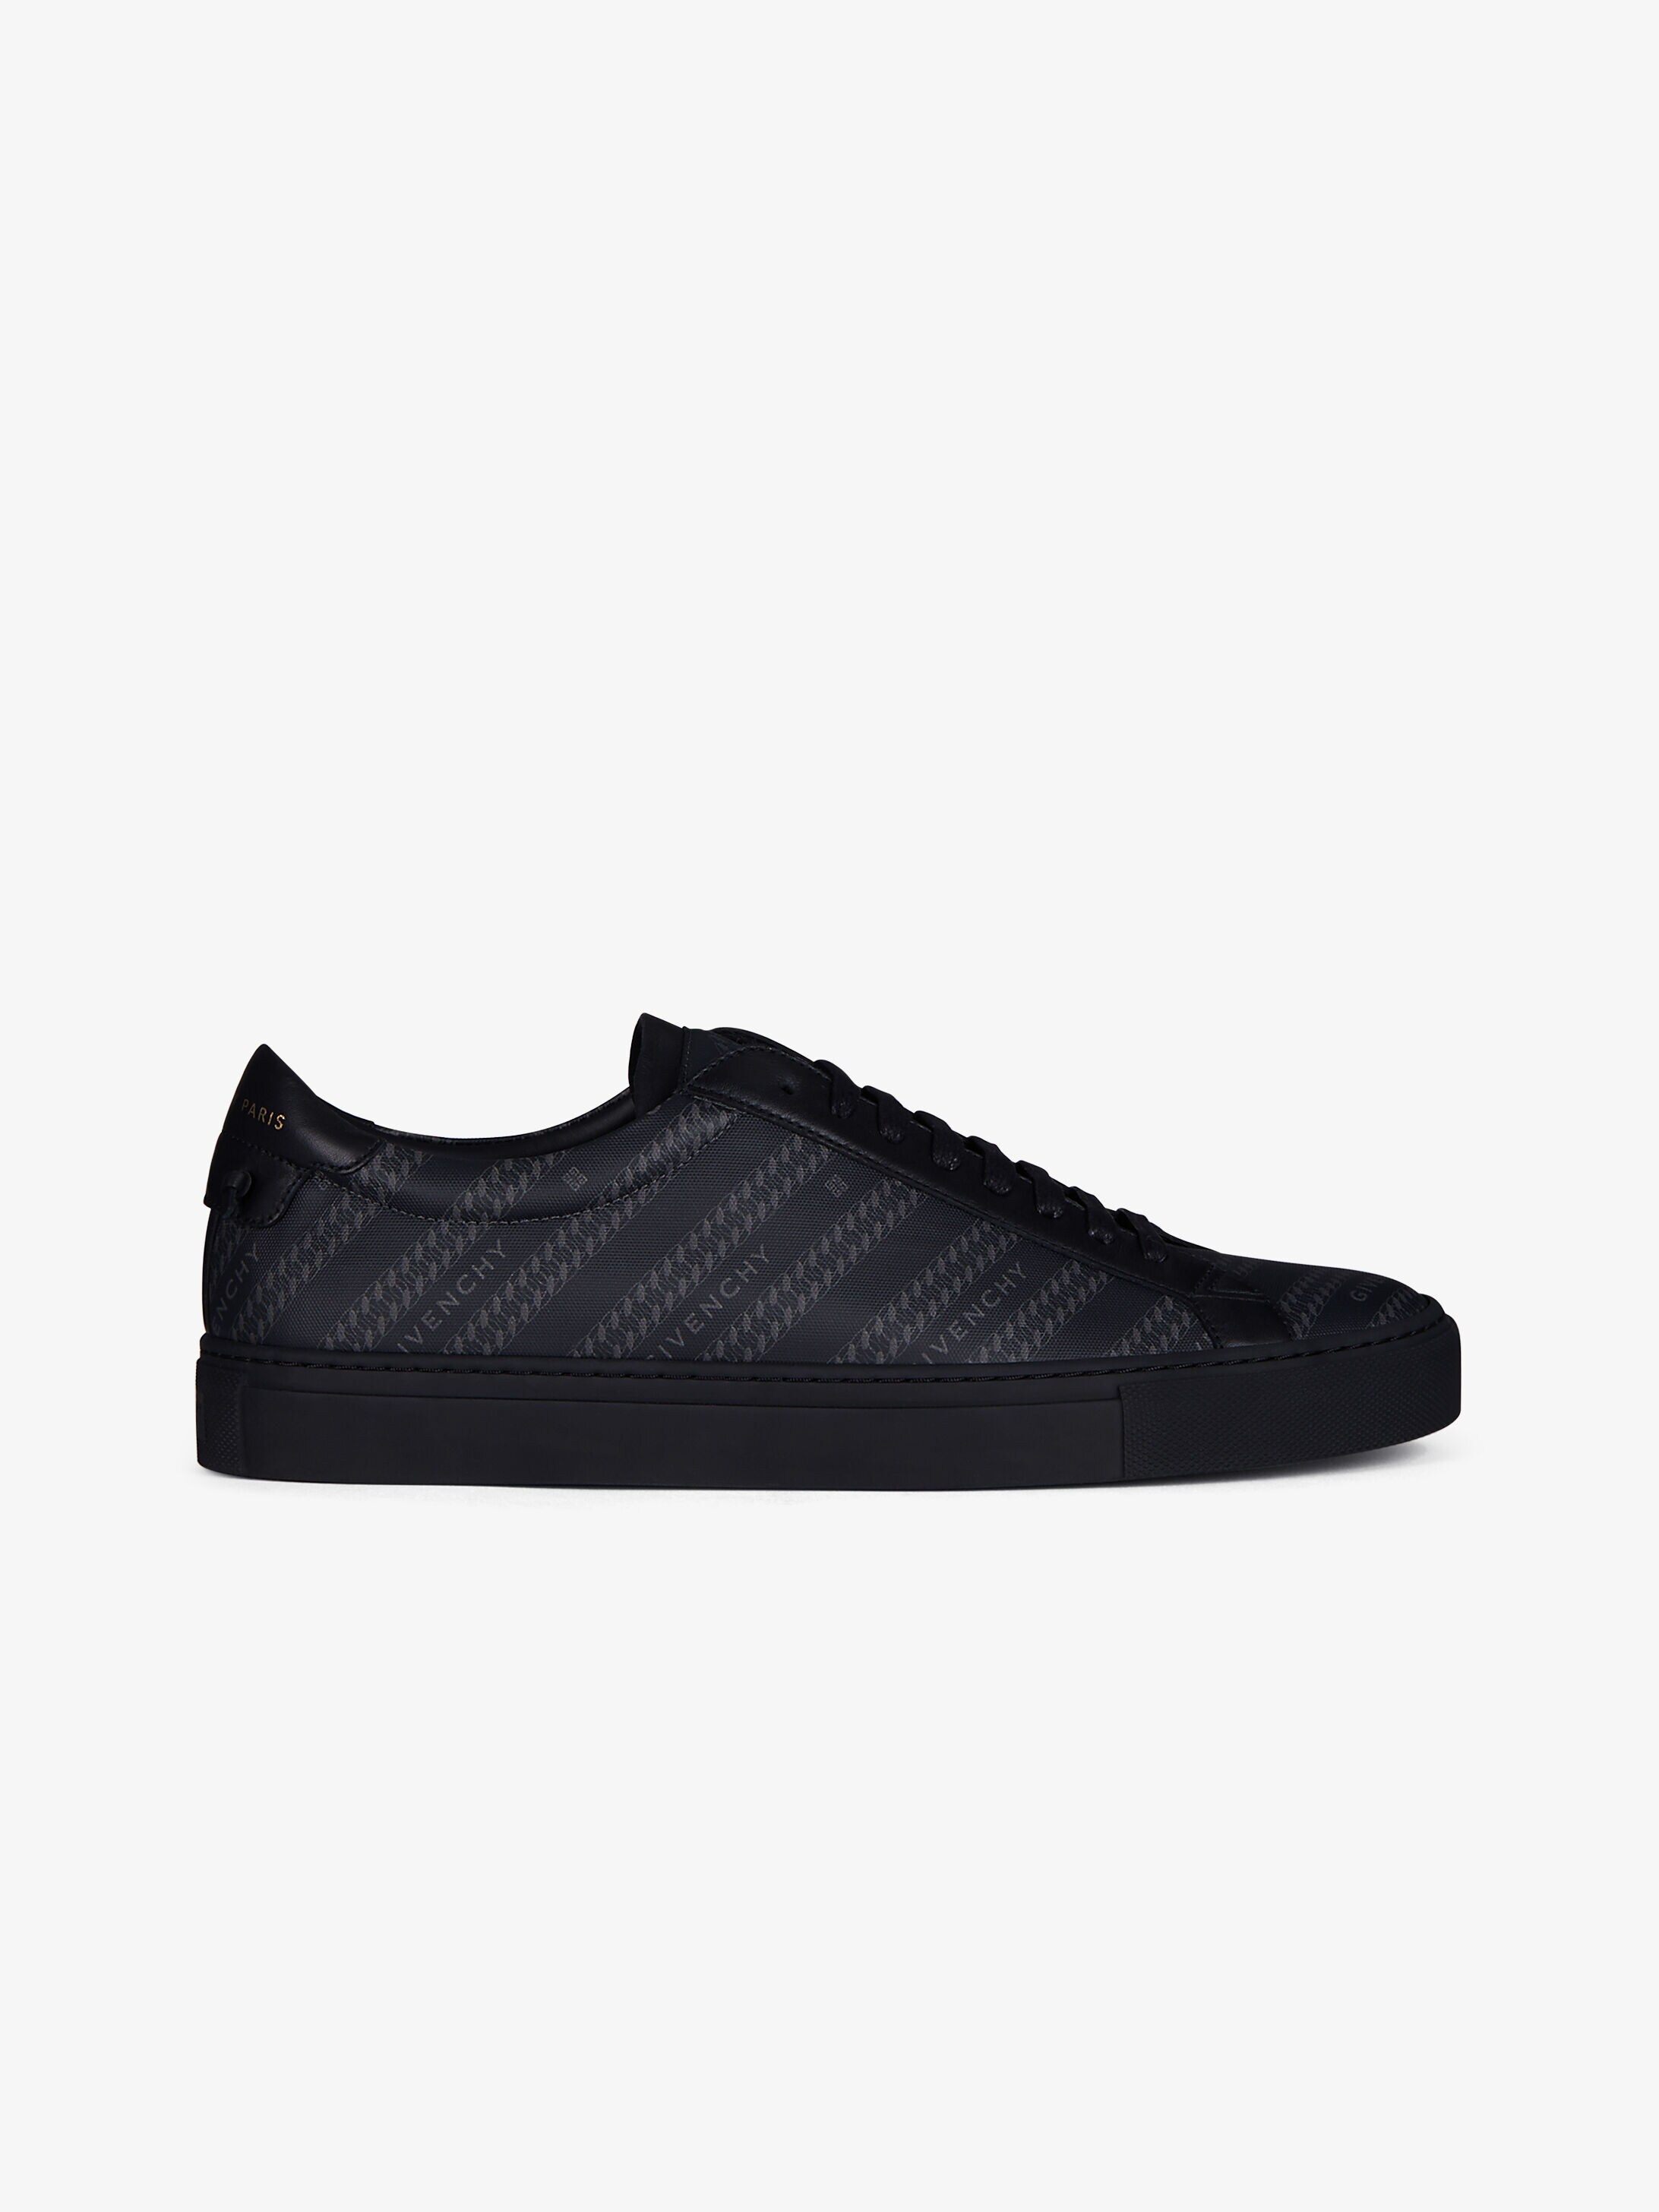 givenchy mens trainers